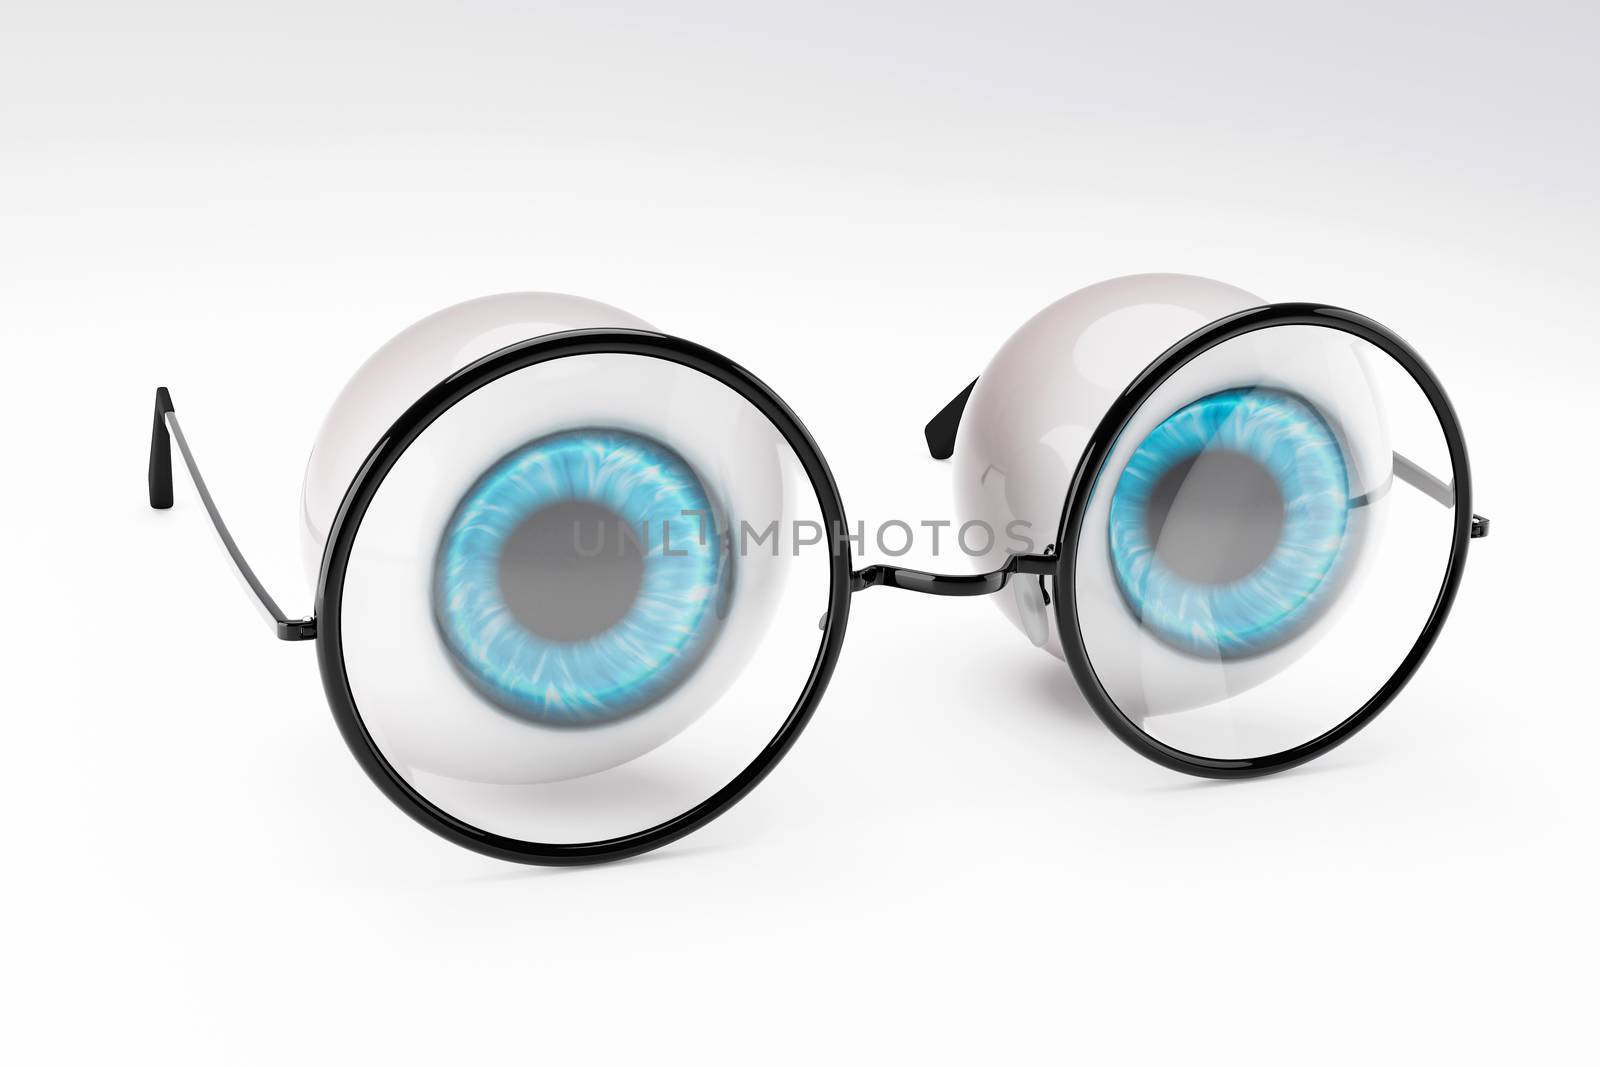 The blue eyeball of the human eye and black round glasses put on white background. The concept of people is eye problems or nearsightedness in a surreal style. 3D illustration rendering.